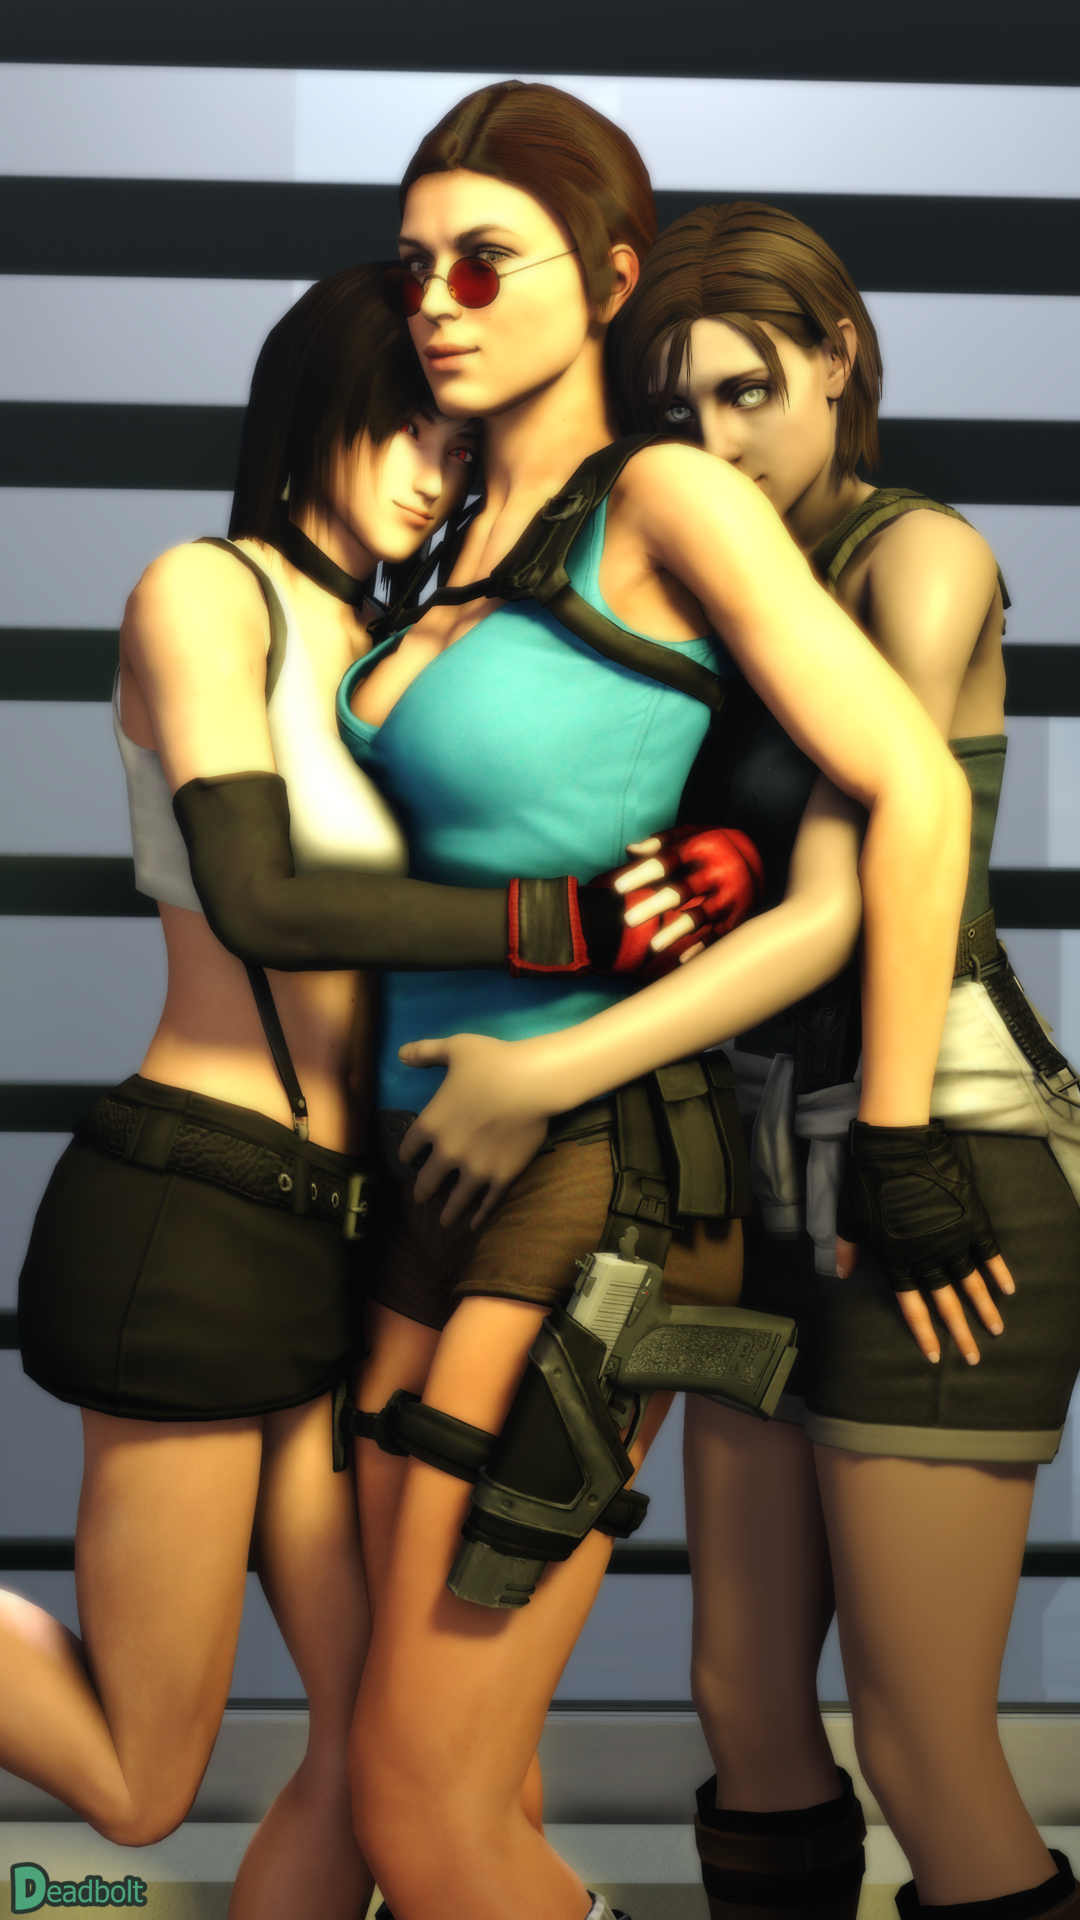 Oddly enough I think Red’s and Smug’s Lara Croft is just as cute in her classic